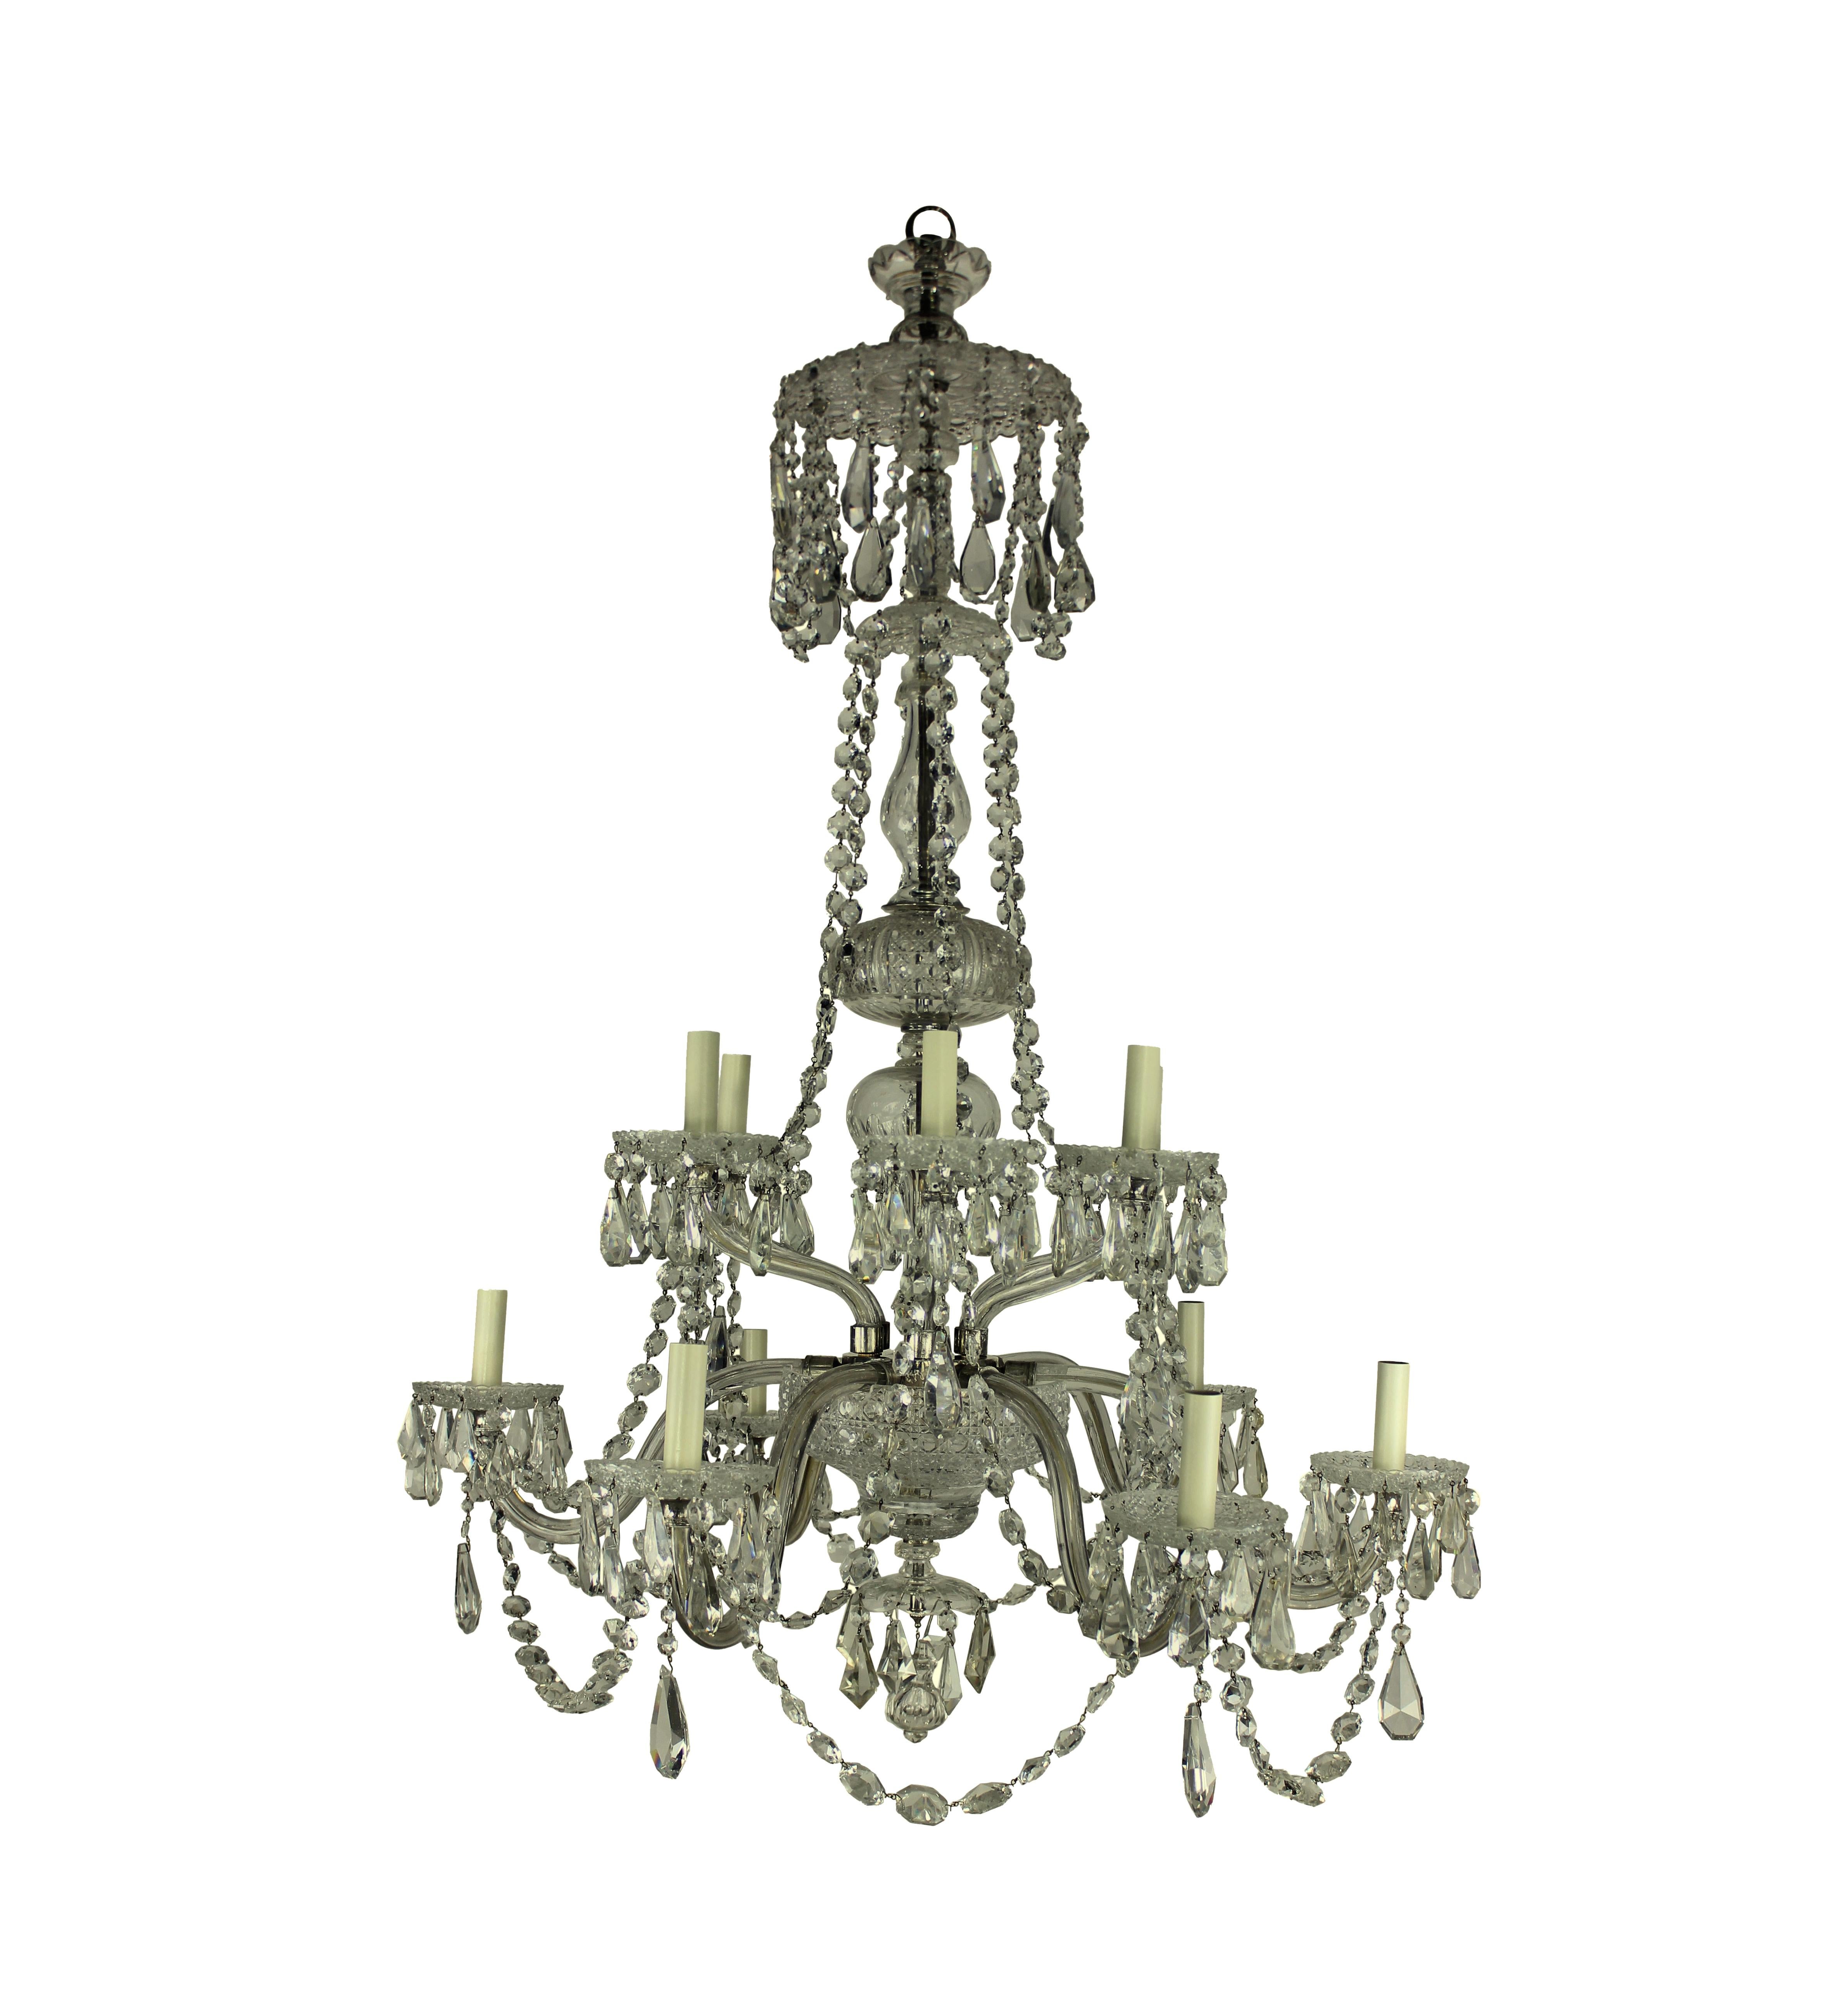 Cut Glass Large 19th Century English Cut-Glass Chandelier For Sale